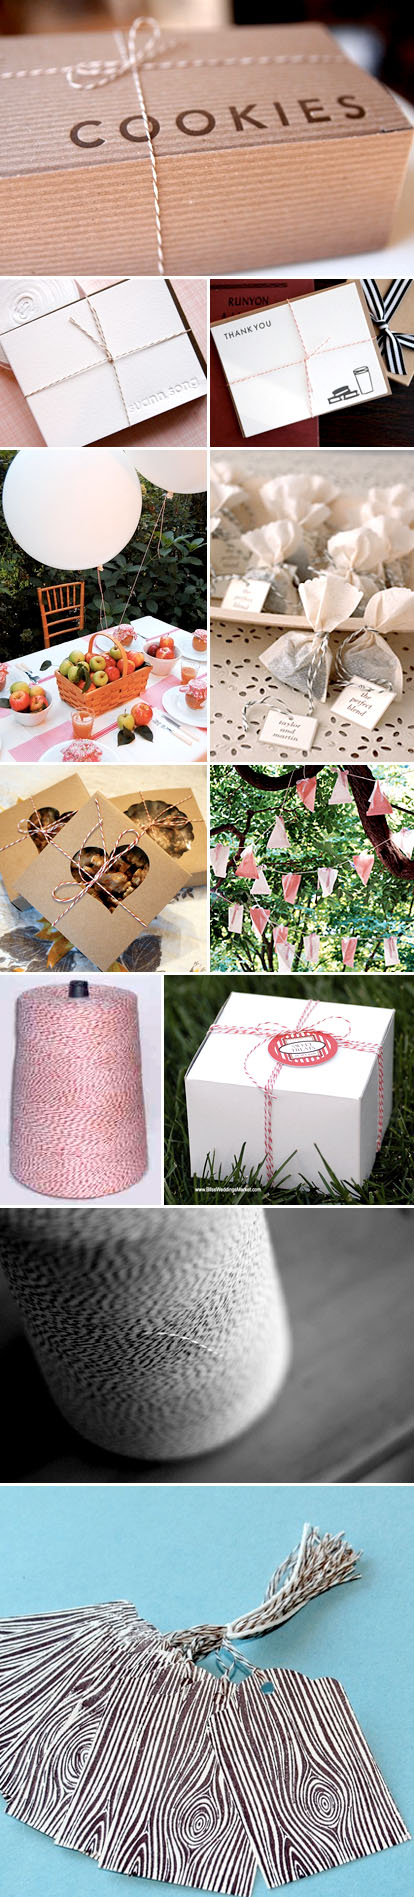 Baker's twine wedding decoration for favors, gifts, and decor